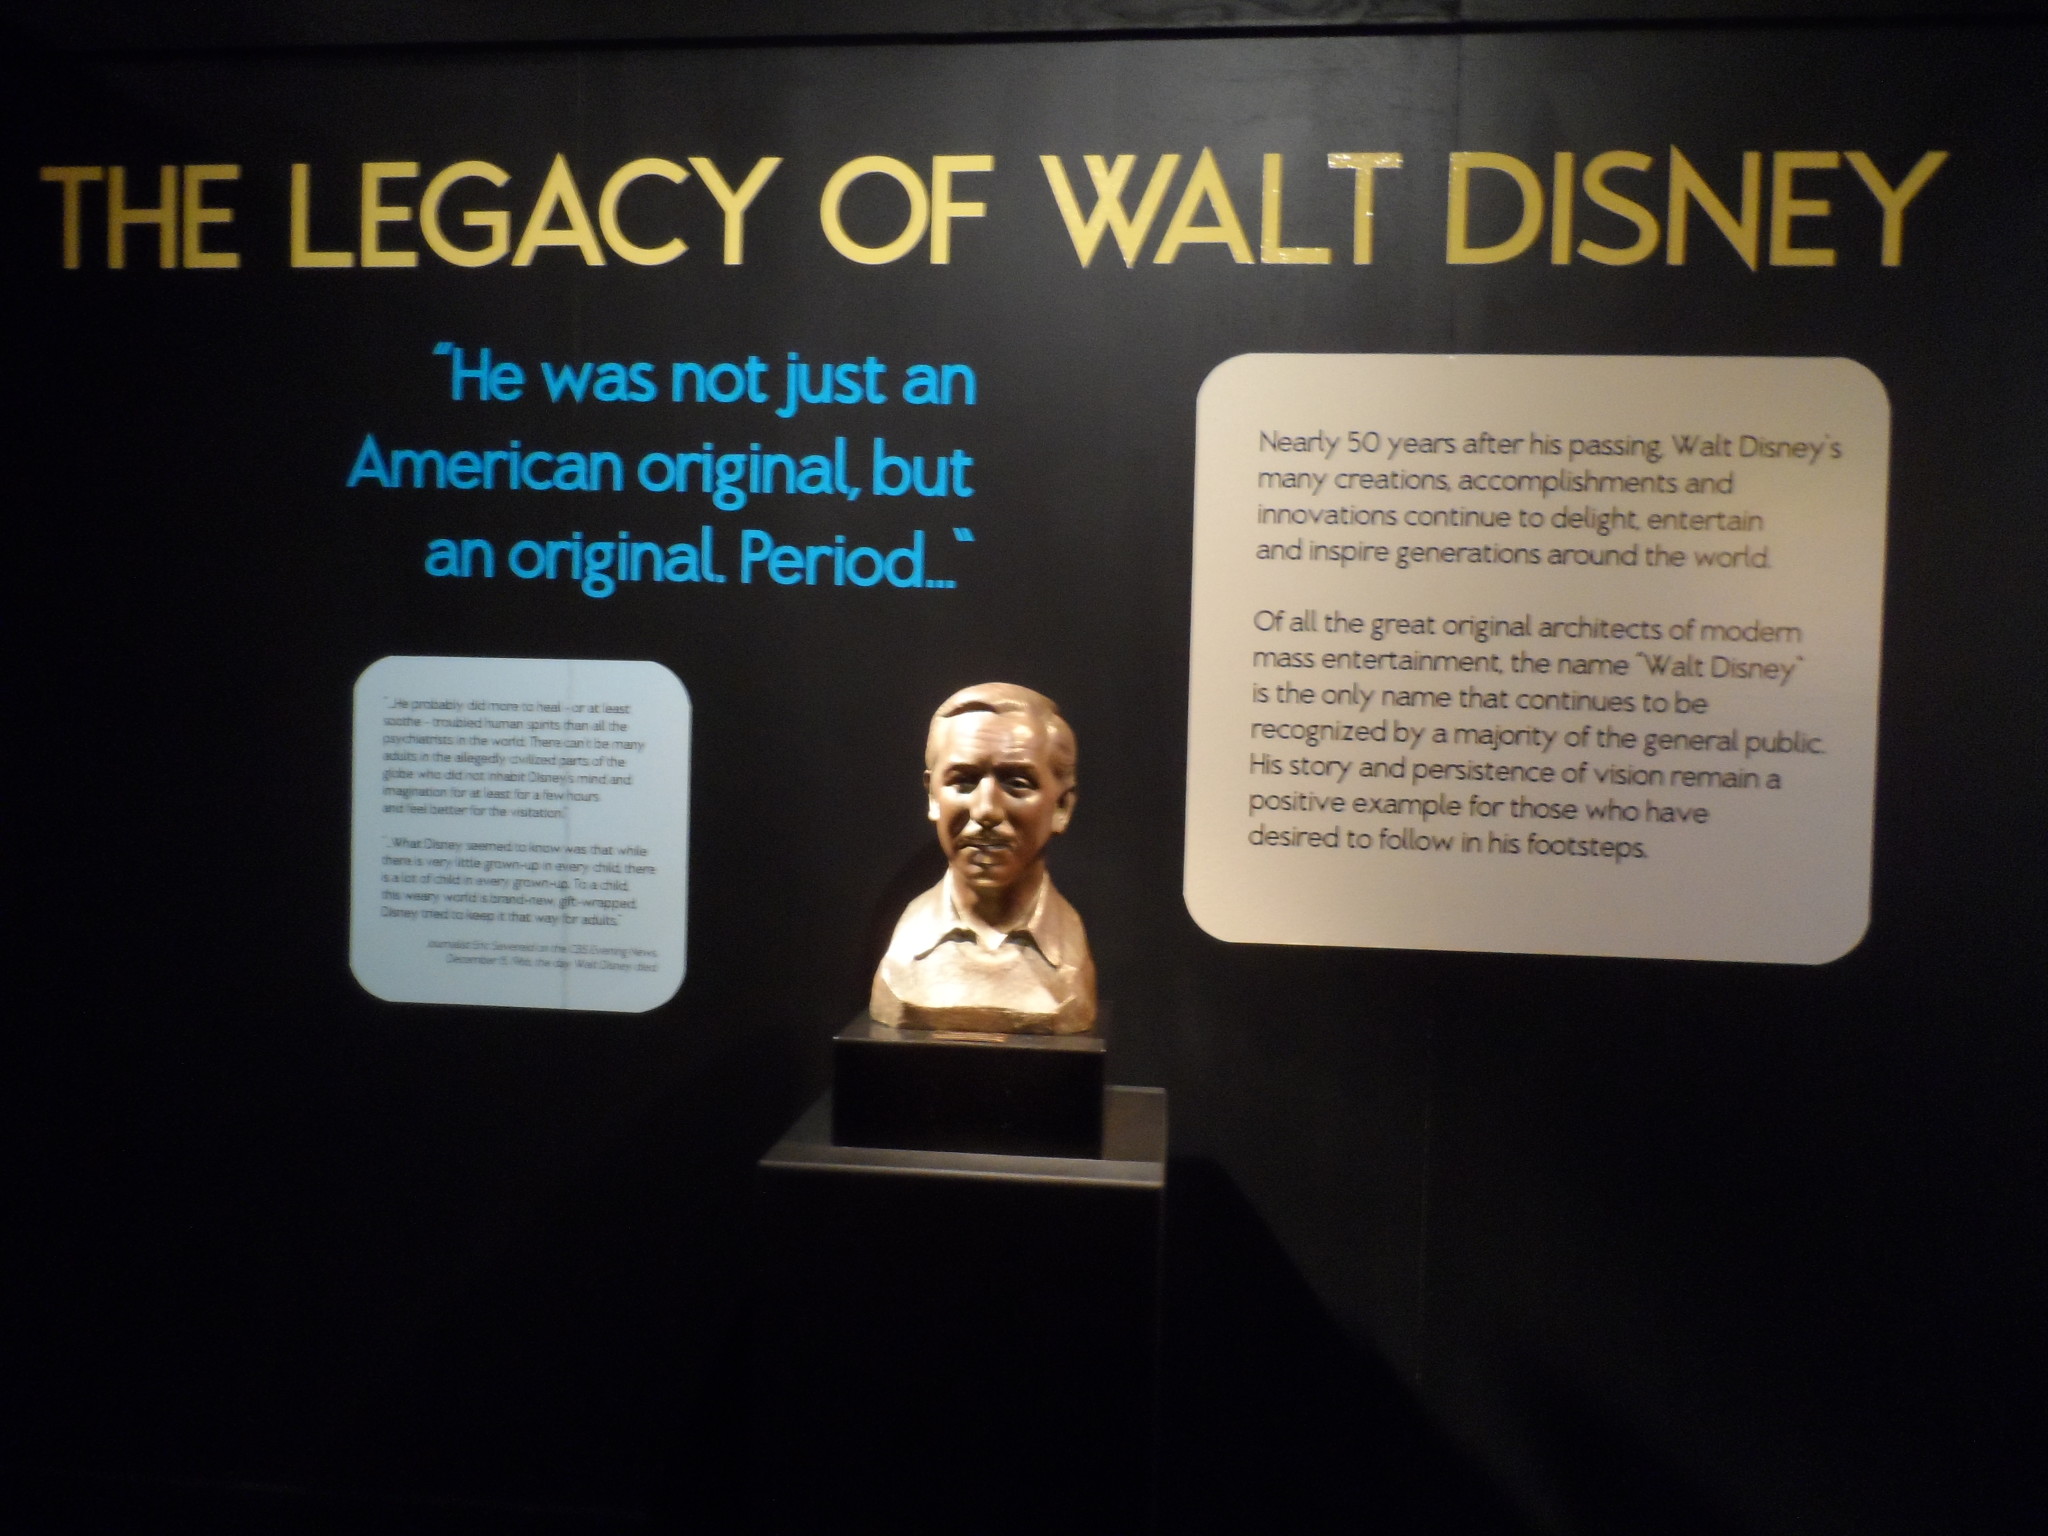 D23 Presents Treasures of the Walt Disney Archives Event at the Chicago Museum of Science and Industry